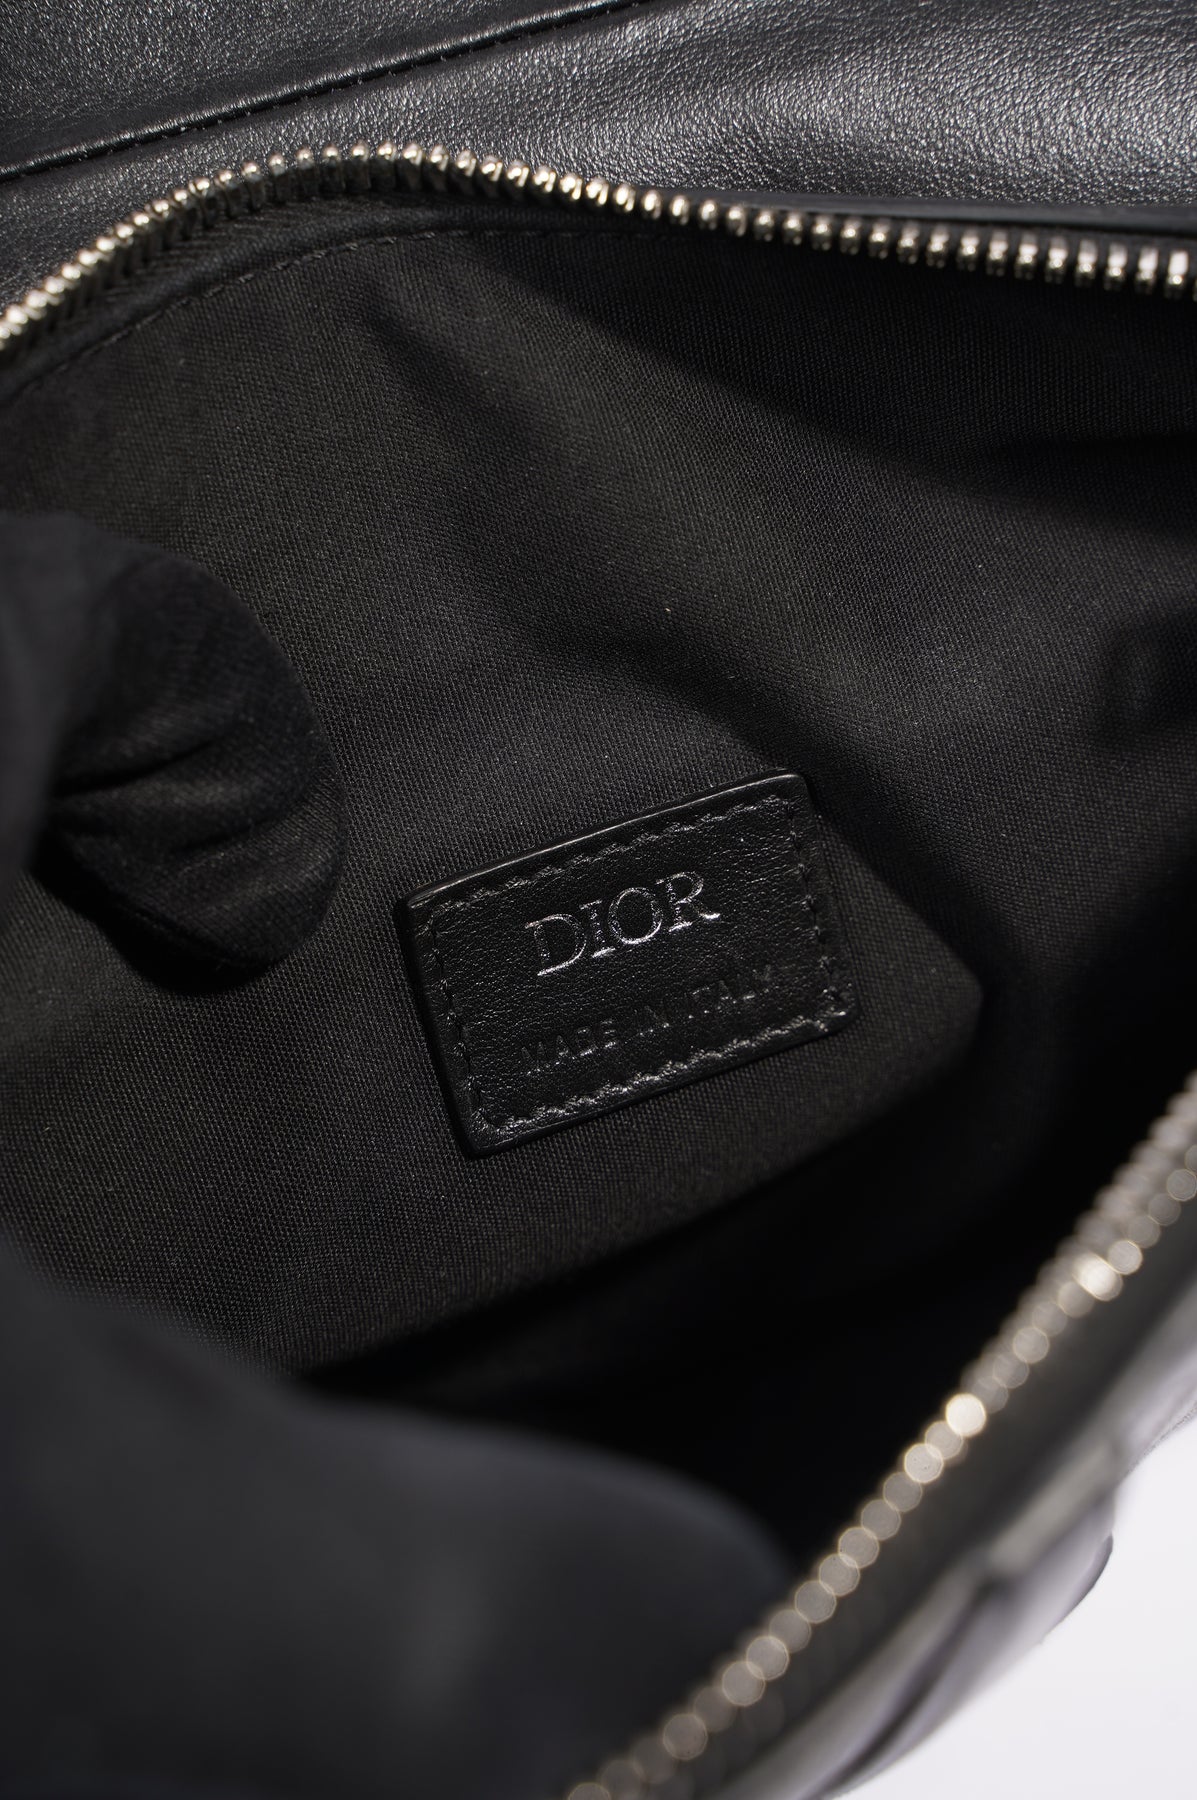 Dior's Saddle Bag for Men is a Menswear Must-Have — Luxury Men's